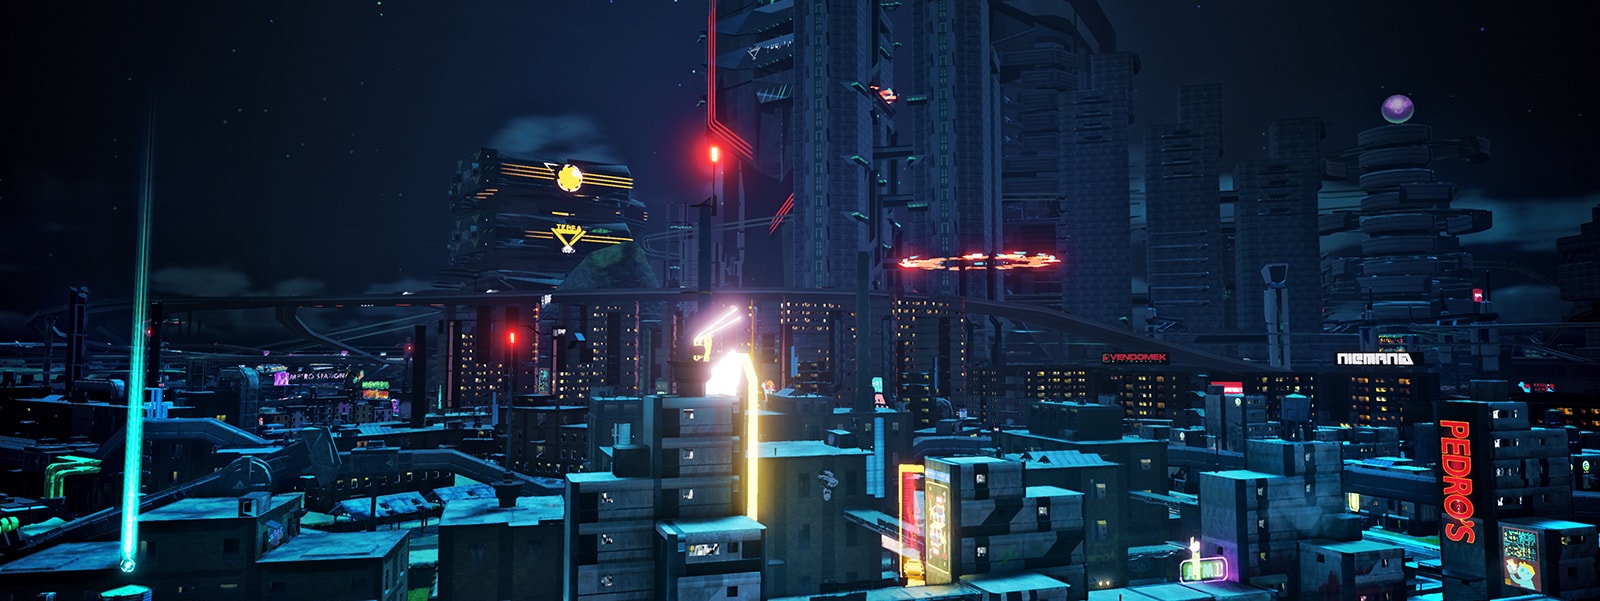 Crackdown 3 screenshot with HDR